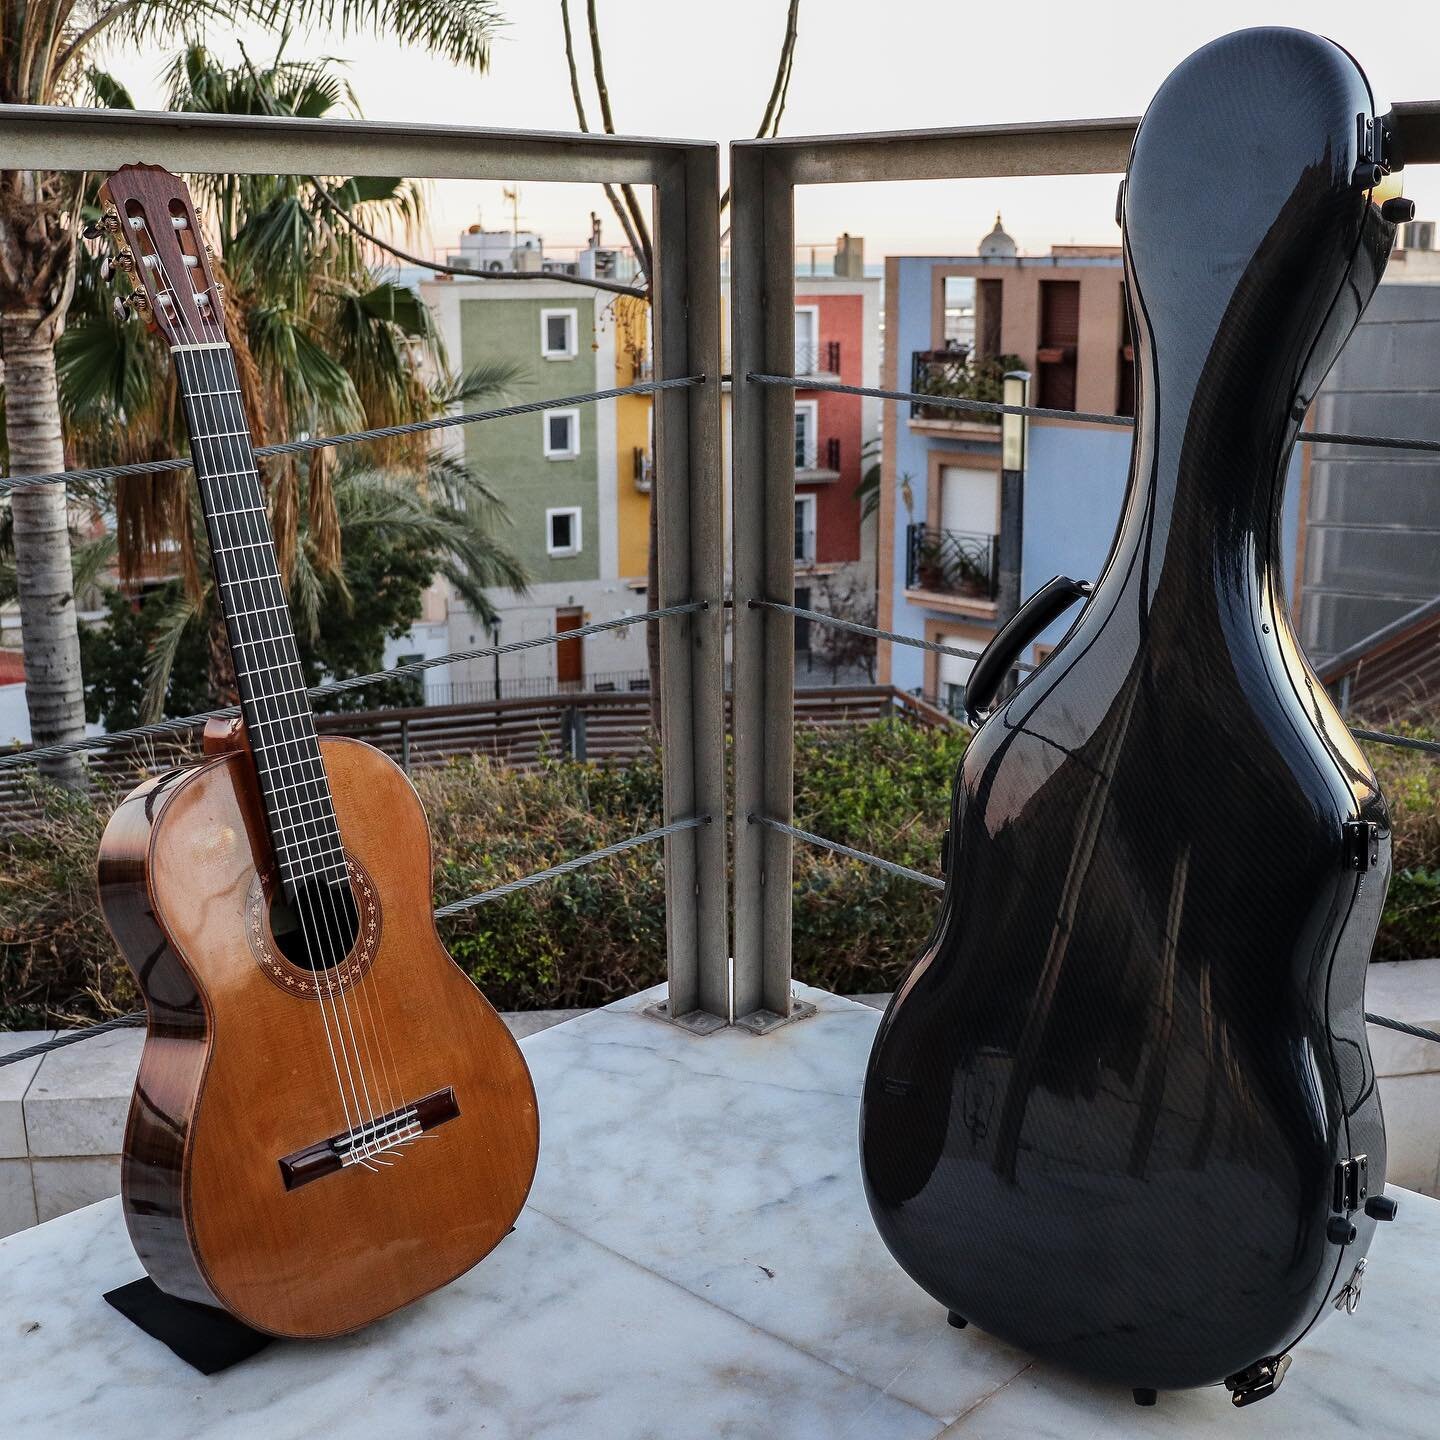 Two weapons of choice just hangin out in Alicante, Spain. My @stevenwalterguitars and @accordcase . Hope to be back some day soon. 

#classicalguitar #stevenwalterguitars #accordcase #spain #alicante #classical #guitar #guitarist #musician #nylonstri